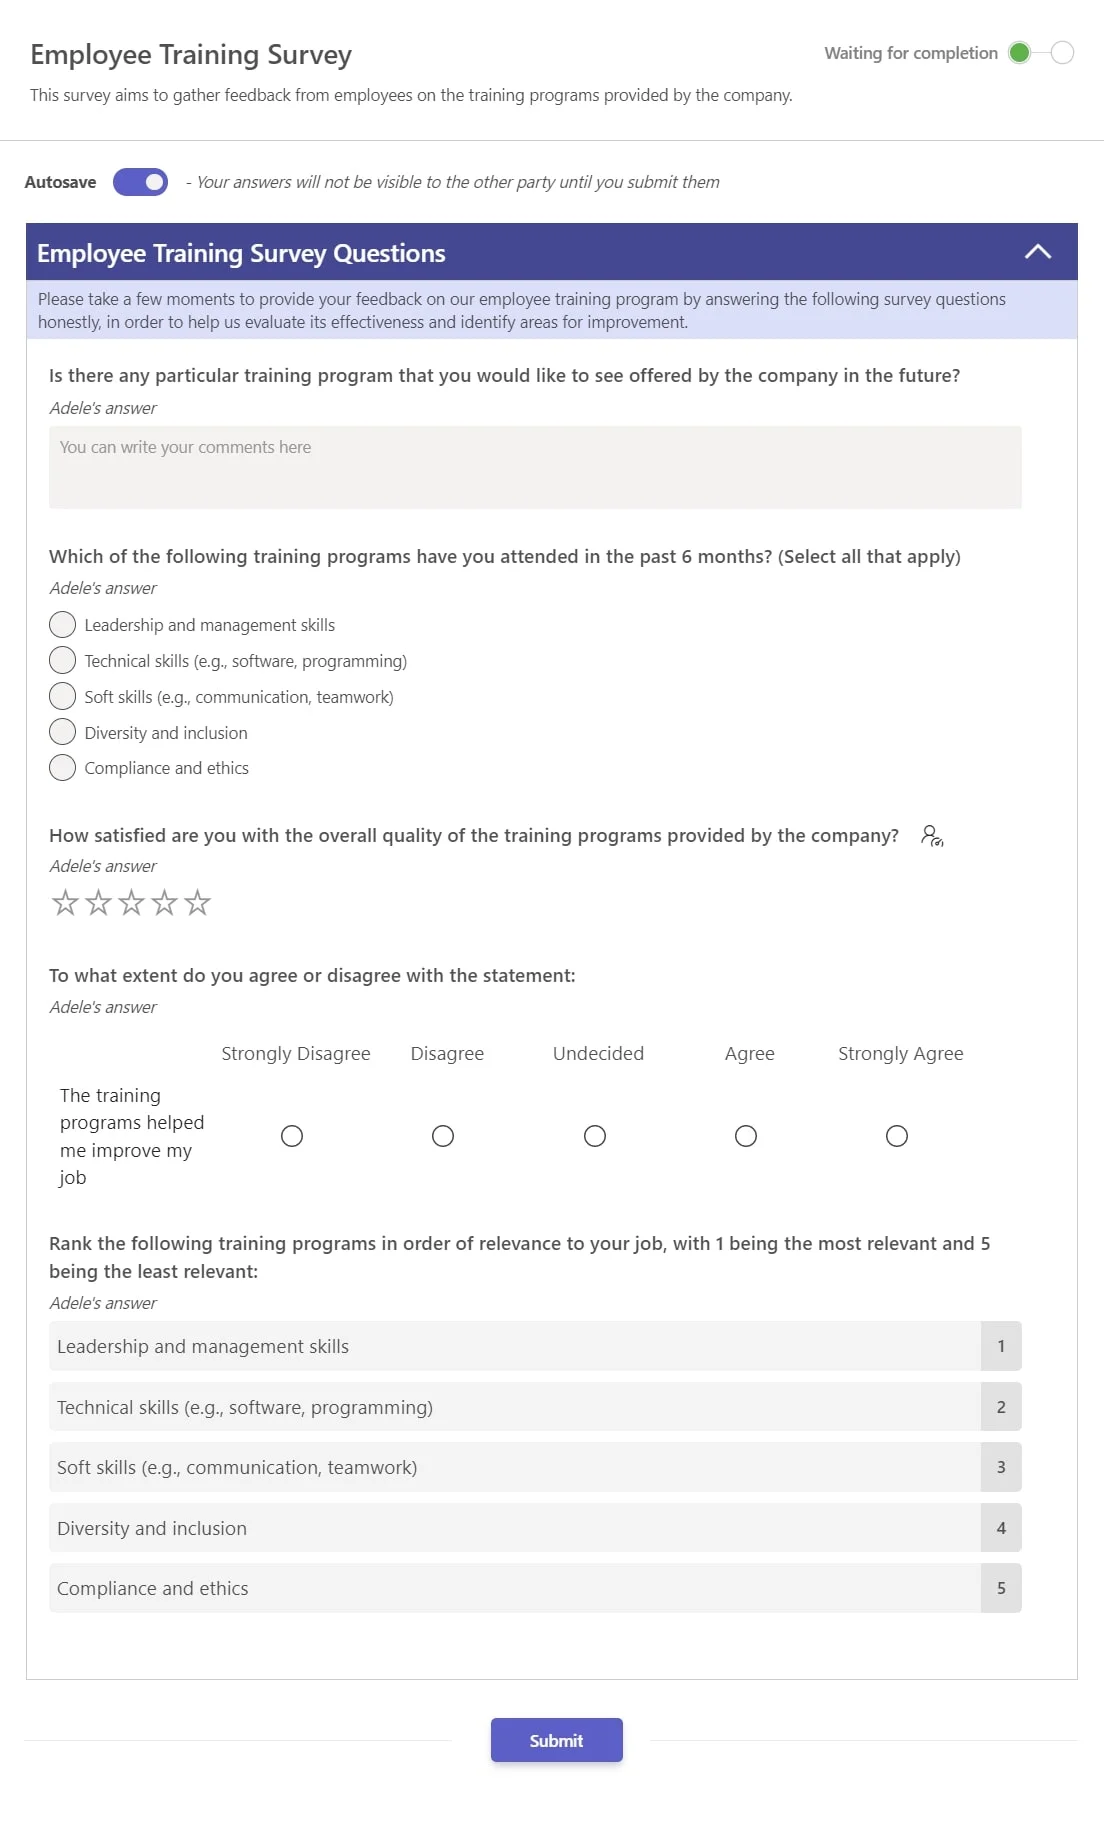 teamflect employee mental health survey template with questions